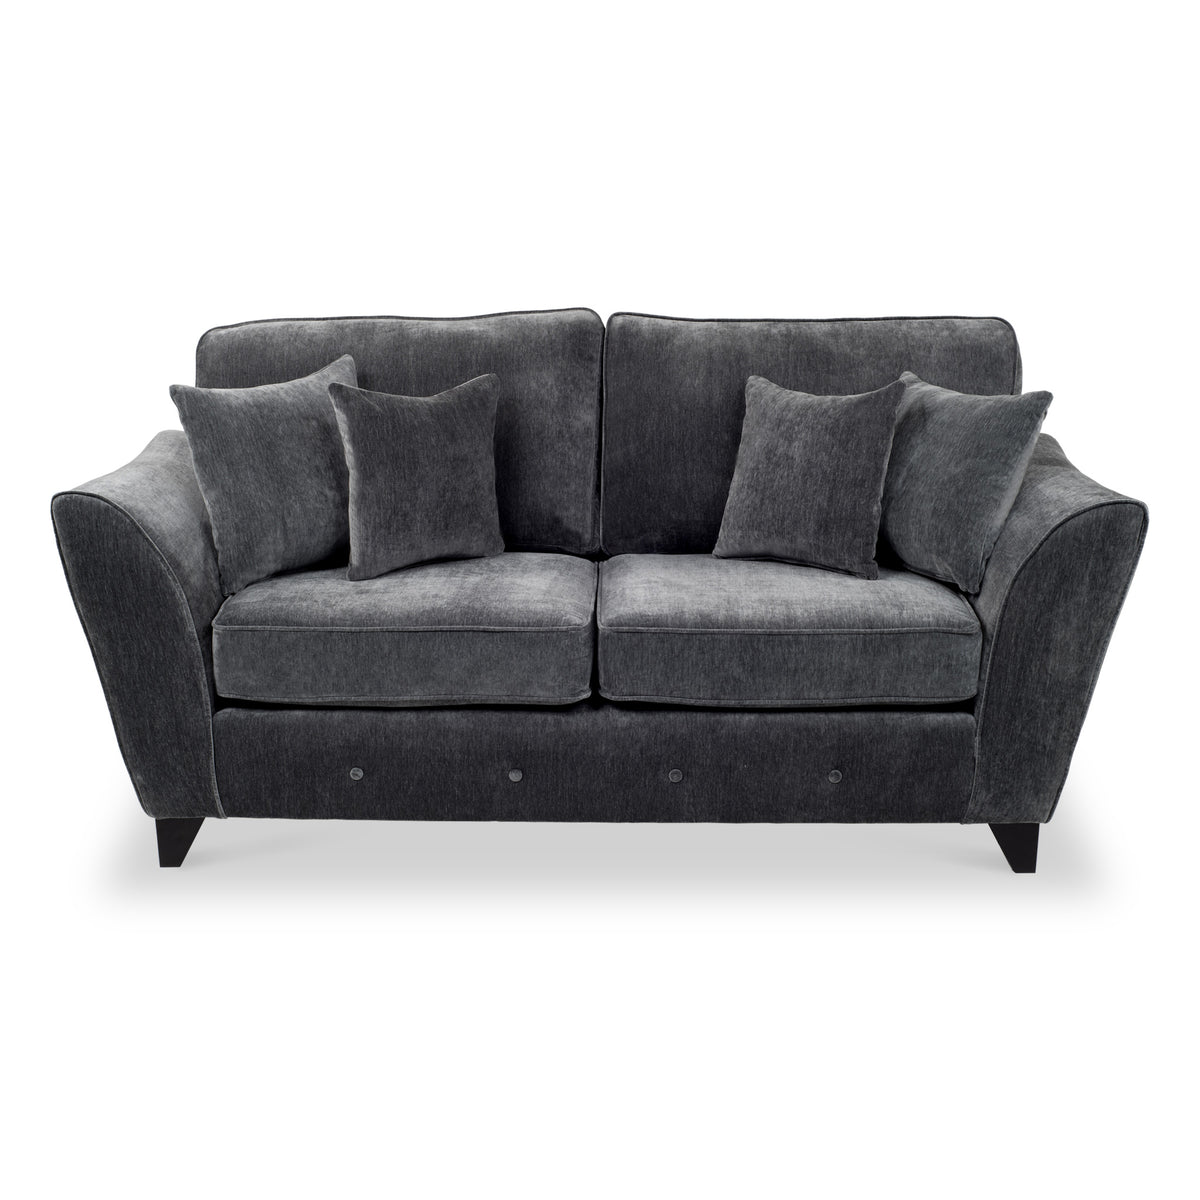 Harris 3 Seater Sofa in Charcoal by Roseland Furniture